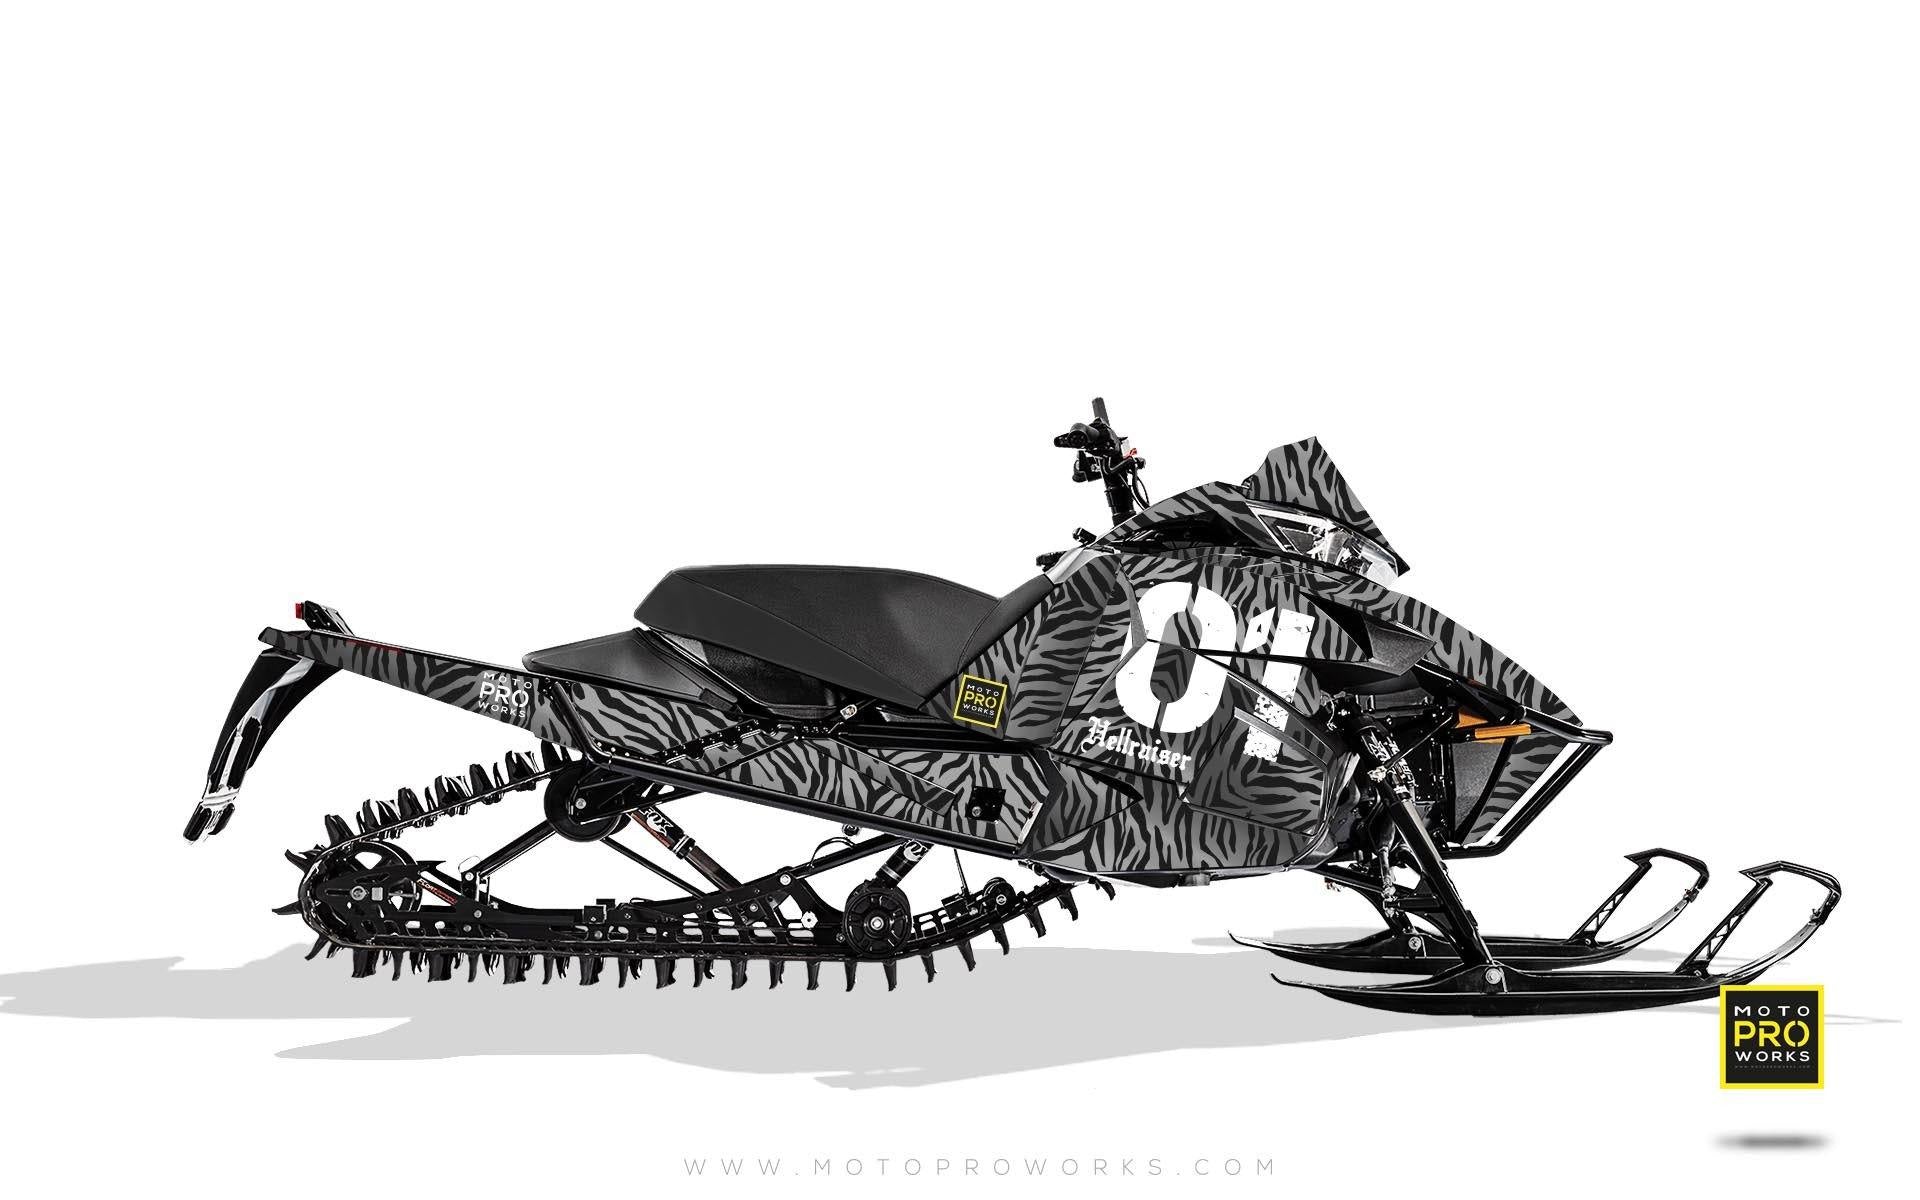 Arctic Cat Graphics - "Stripey" (grey) - MotoProWorks | Decals and Bike Graphic kit